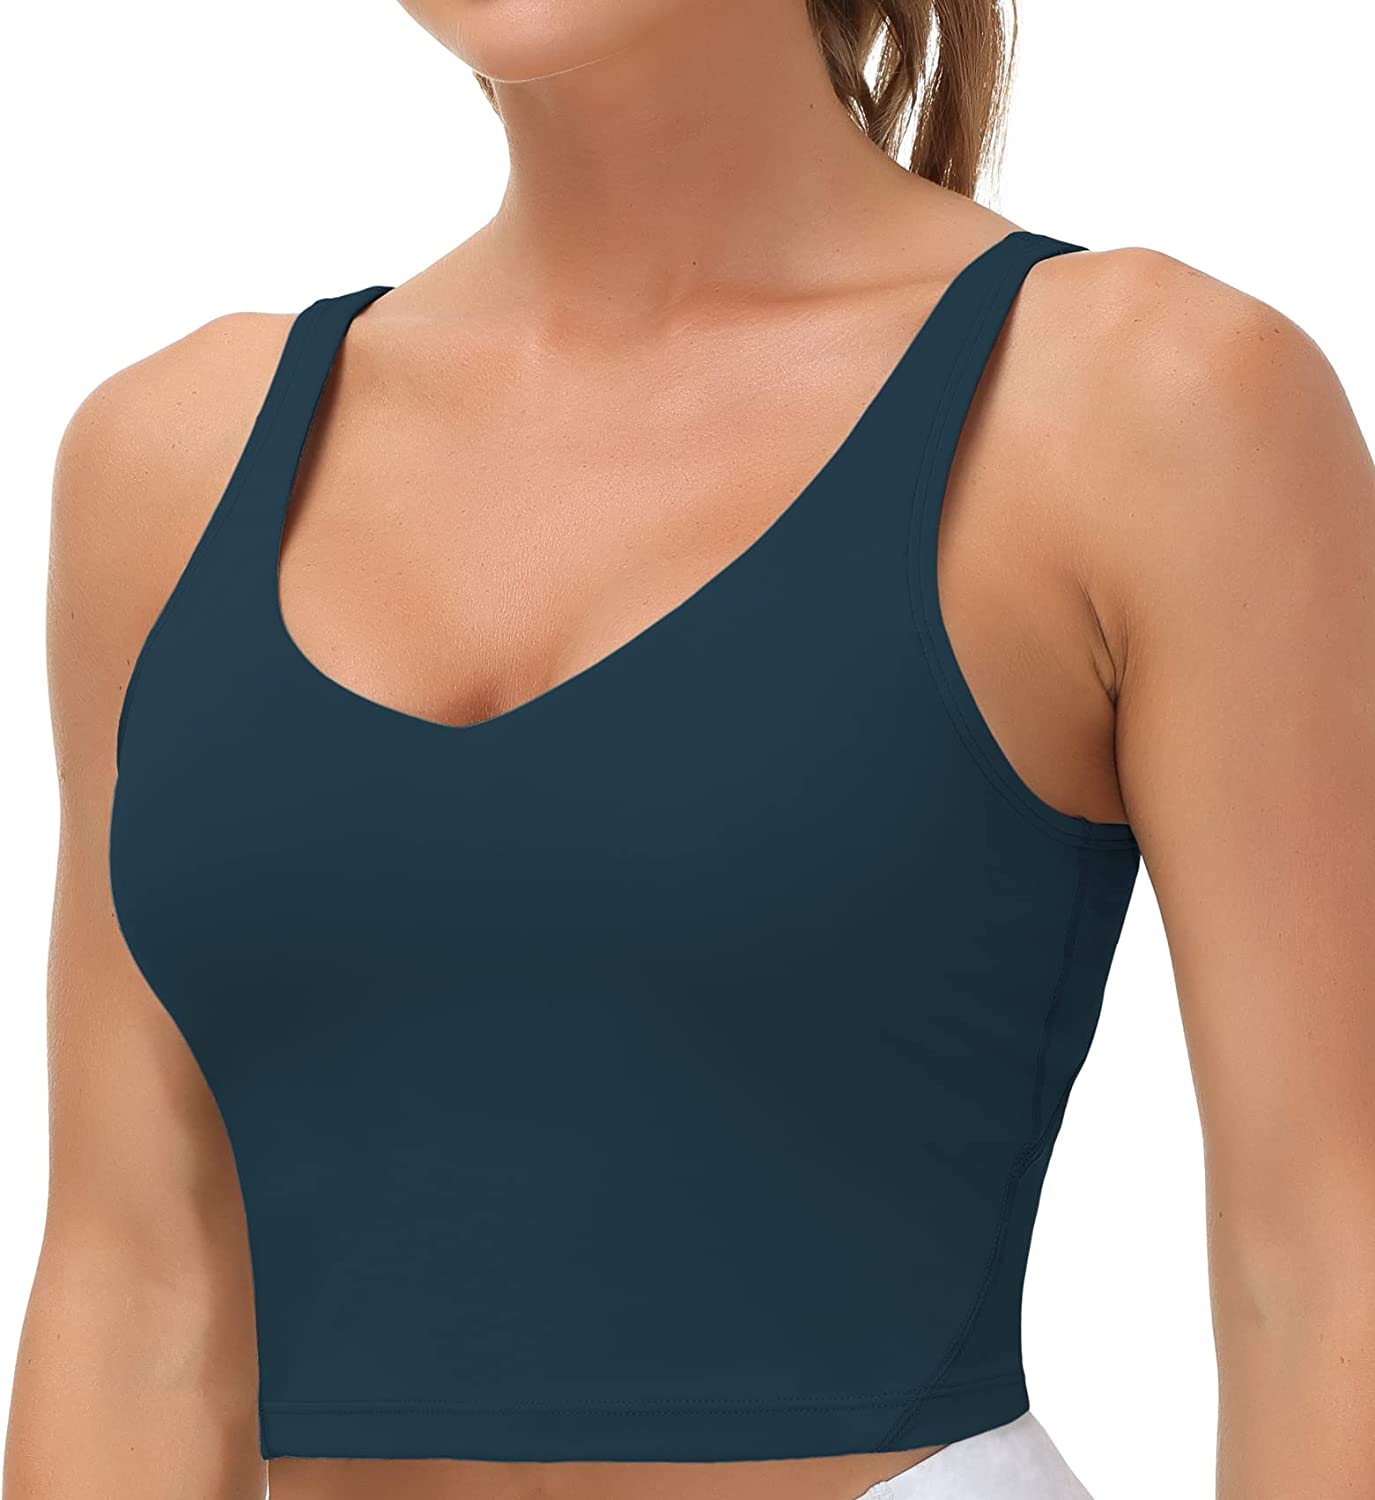 Why Women Love THE GYM PEOPLE Women's Sports Bra: Longline, Wirefree,  Padded with Medium Support, by Smahssan